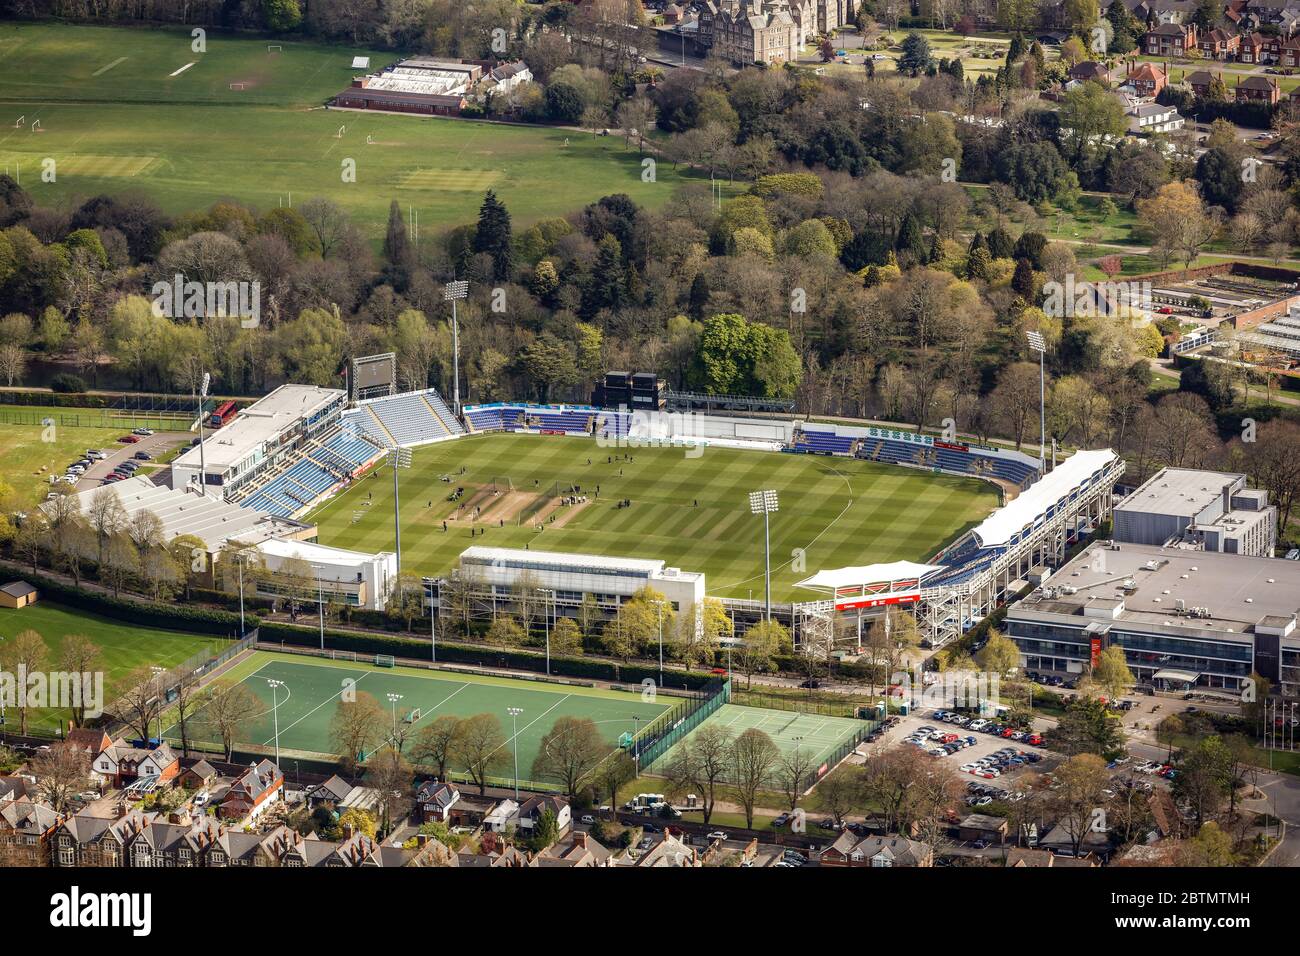 Aerial View of Sophia Gardens Cricket Ground in Cardiff, Wales Stock Photo